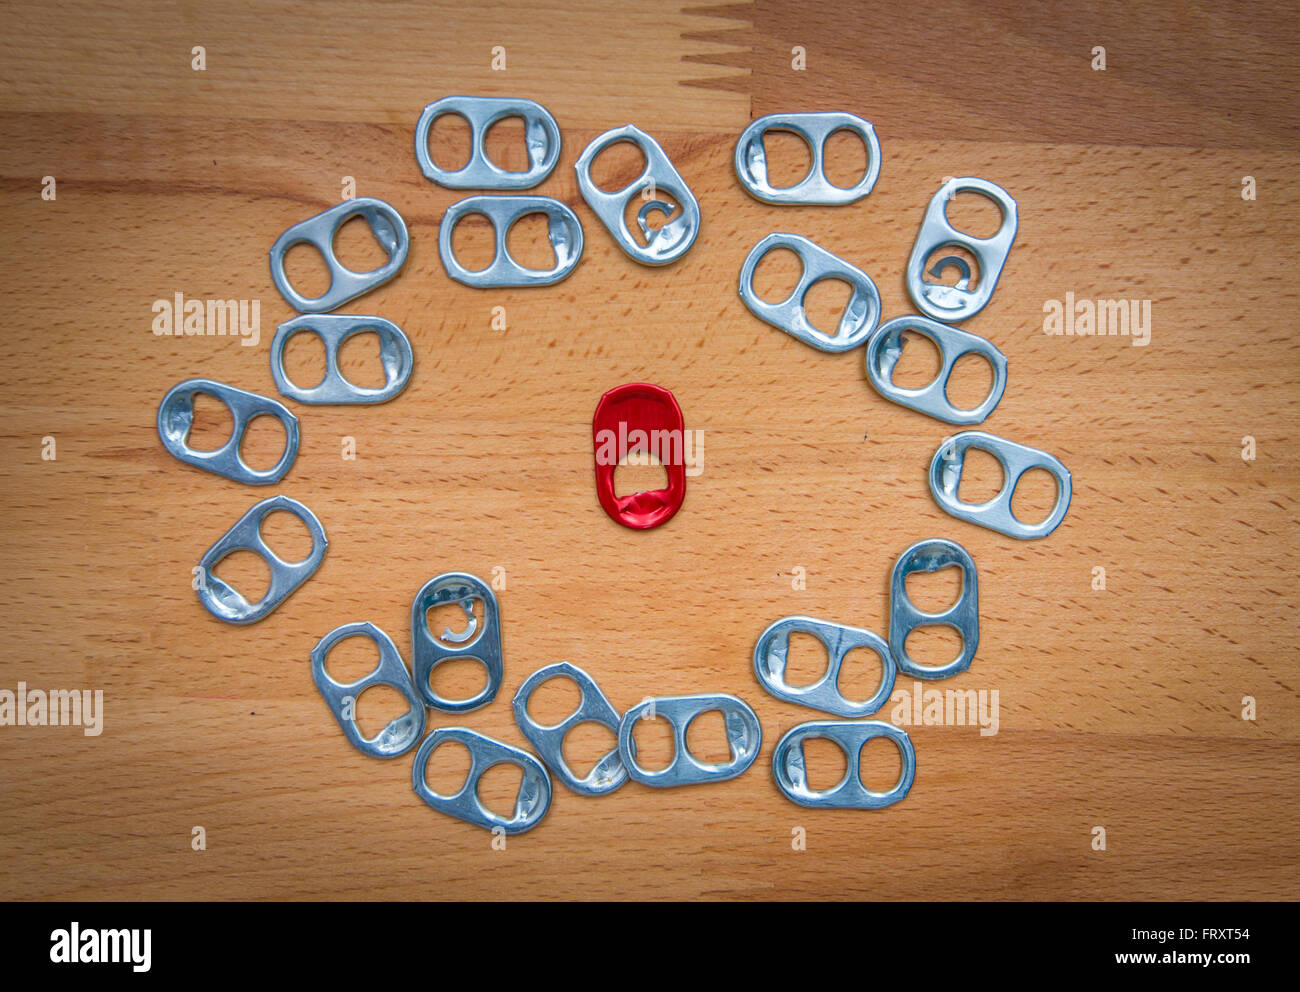 Red metal ring pull standing out from the crowd, leadership, difference concept Stock Photo